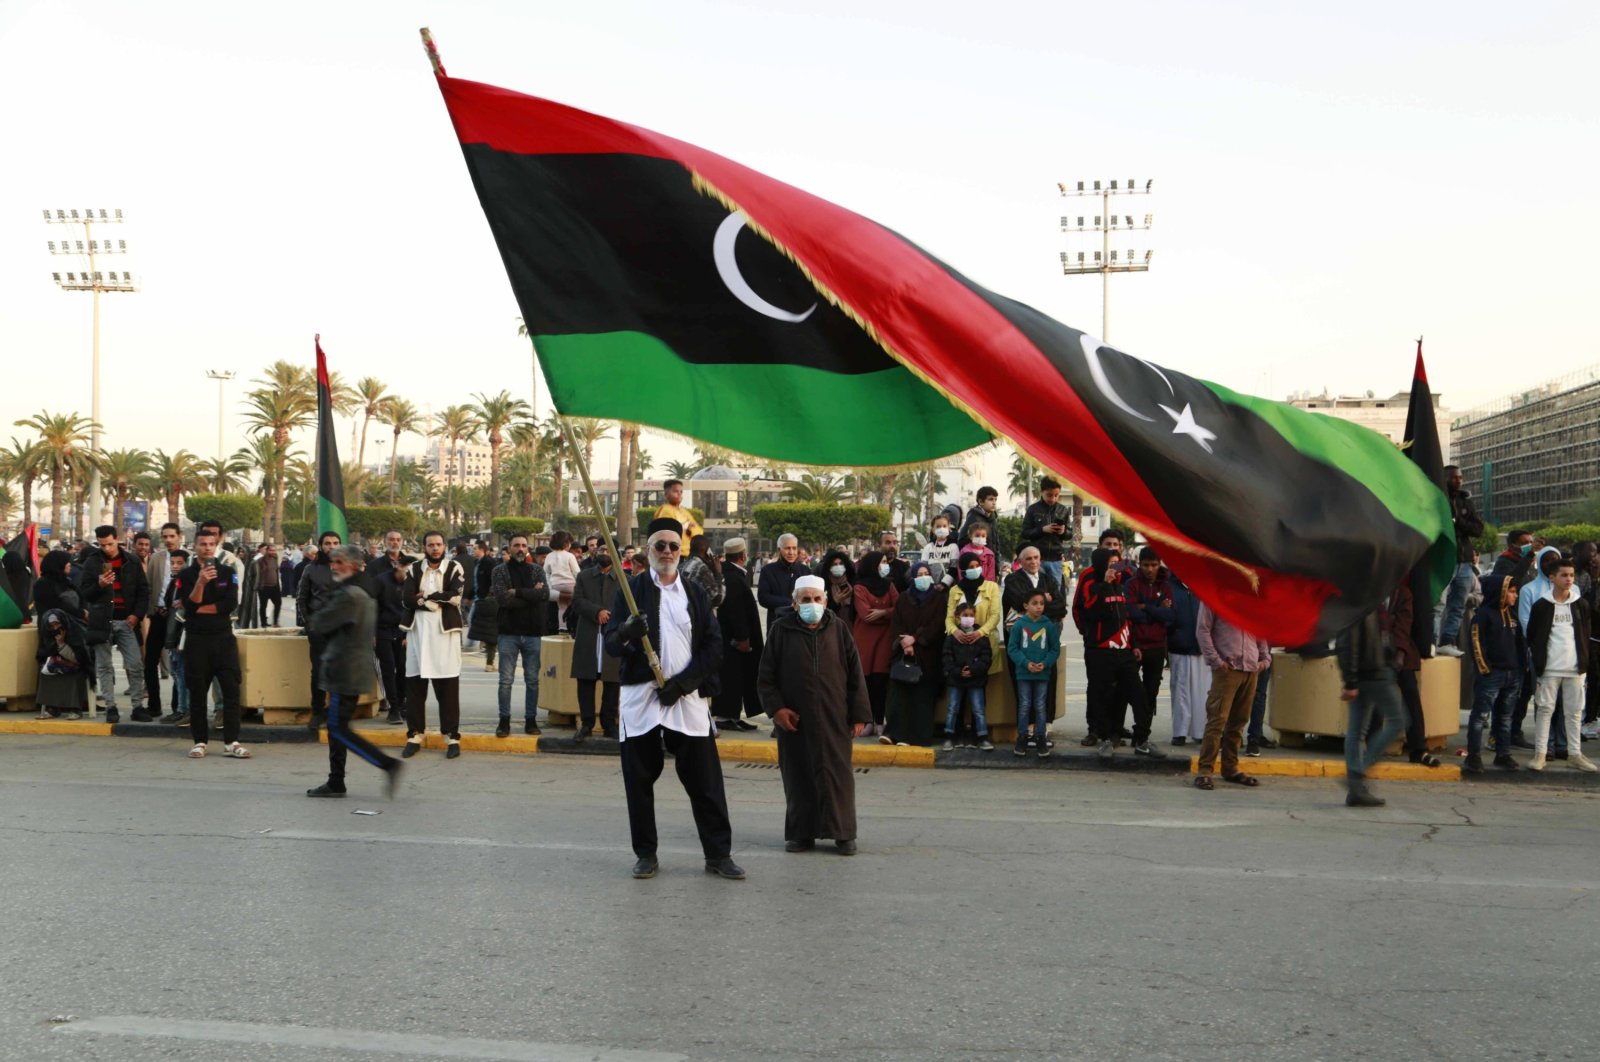 Libyans celebrate the 70th anniversary of their country&#039;s independence, despite widespread disappointment over the postponement of presidential elections, in Martyrs&#039; Square, Tripoli, Libya, Dec. 24, 2021. (AP Photo)